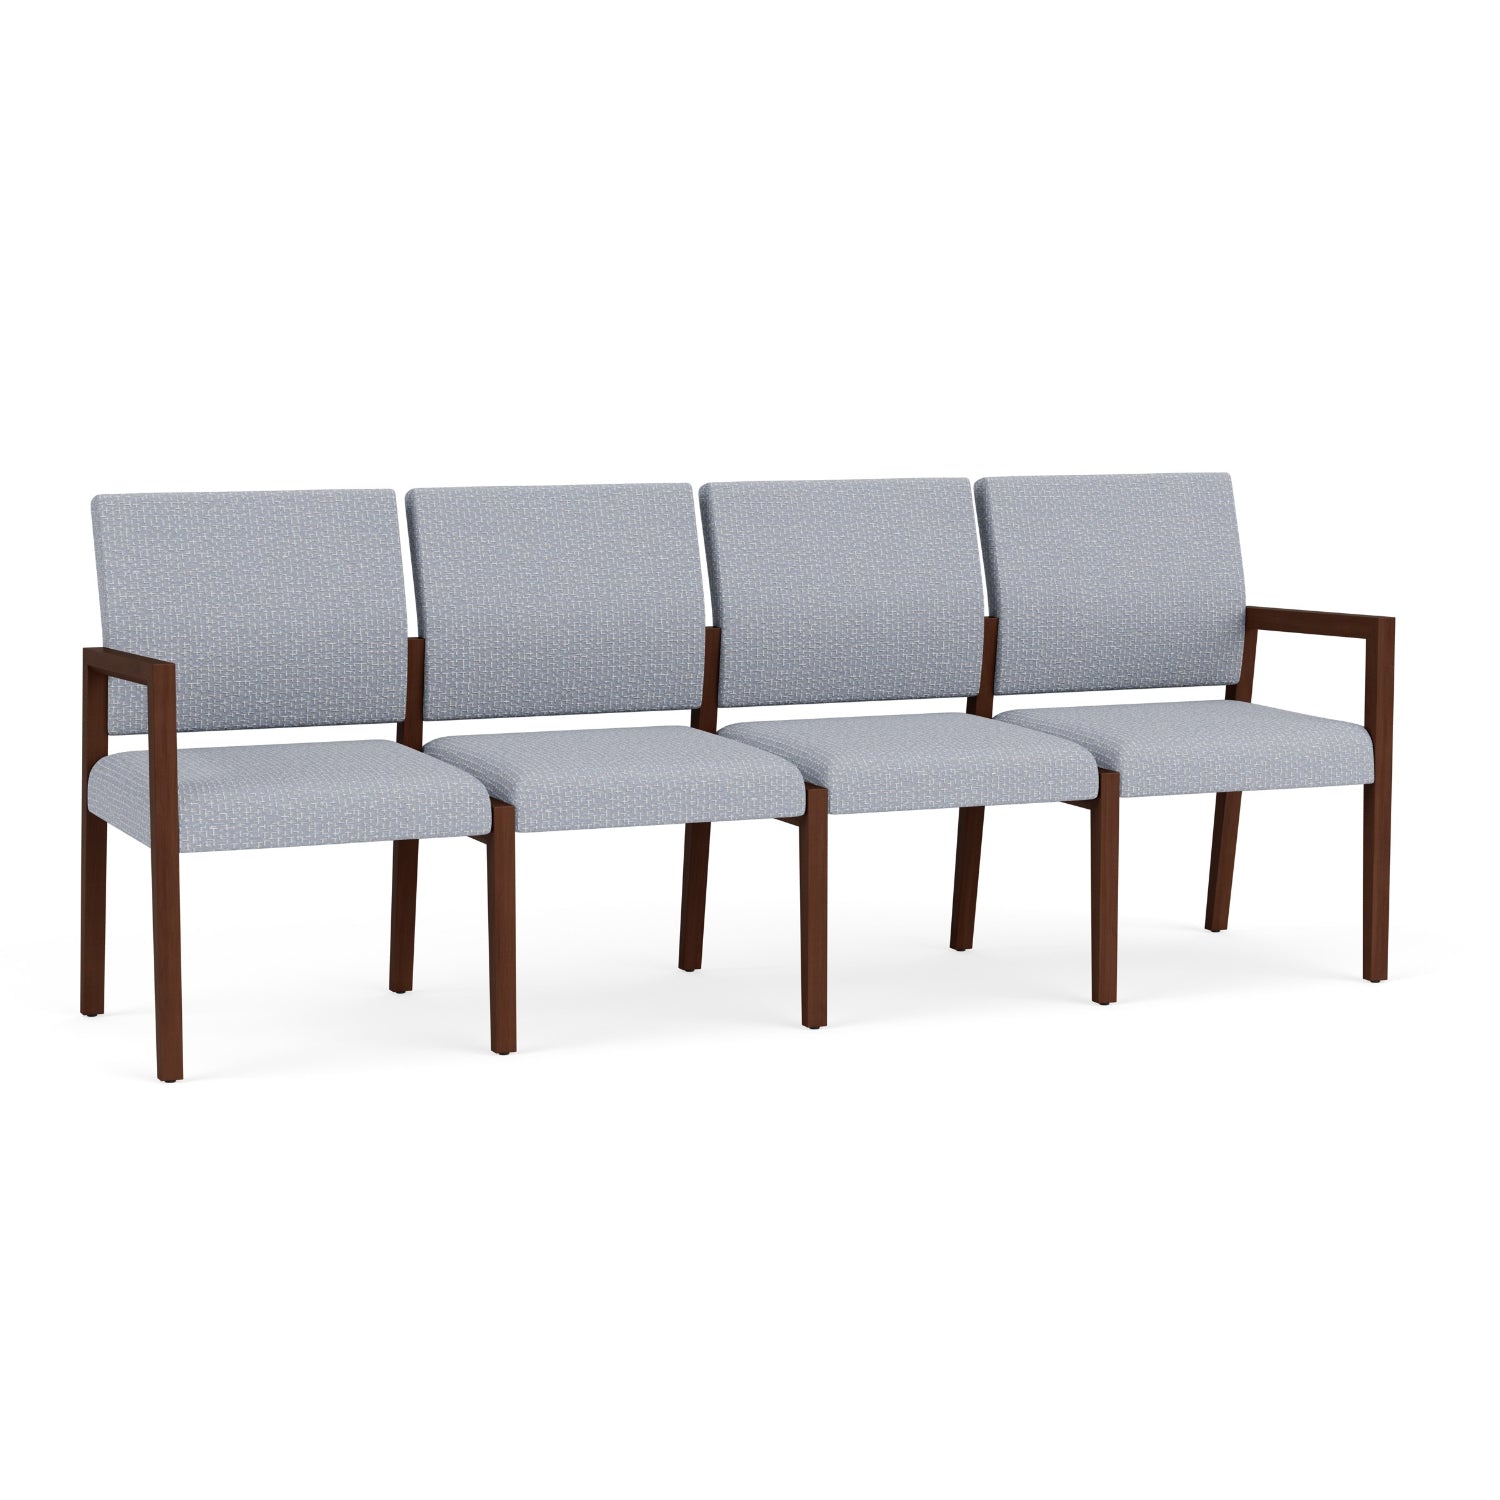 Brooklyn Collection Reception Seating, 4 Seat Sofa, Designer Fabric Upholstery, FREE SHIPPING